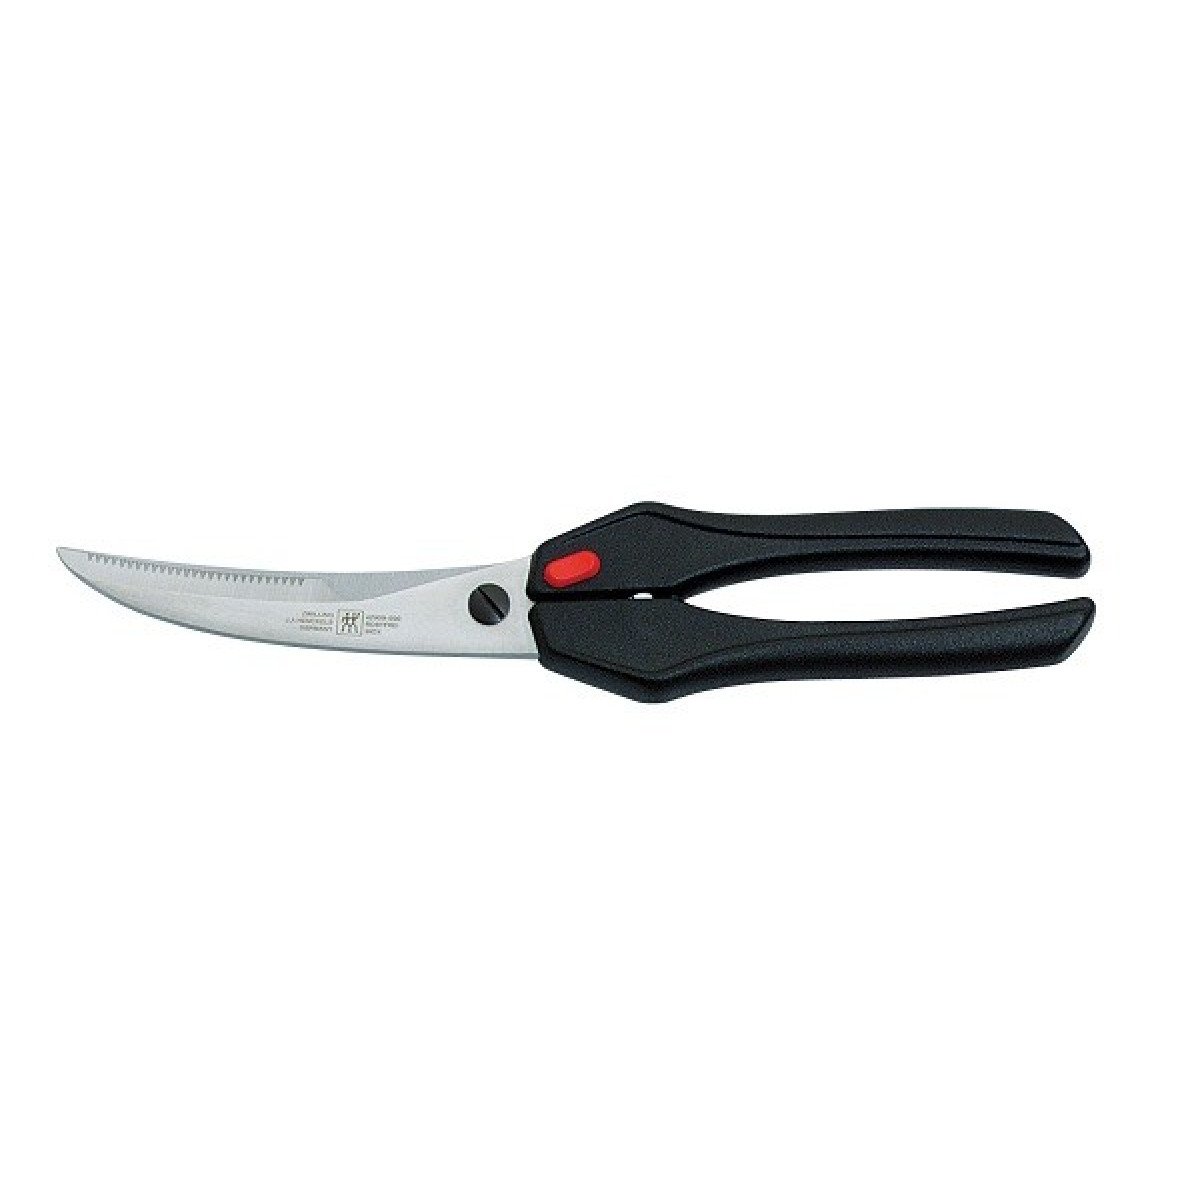 WMF 1883206030 poultry shears  Advantageously shopping at